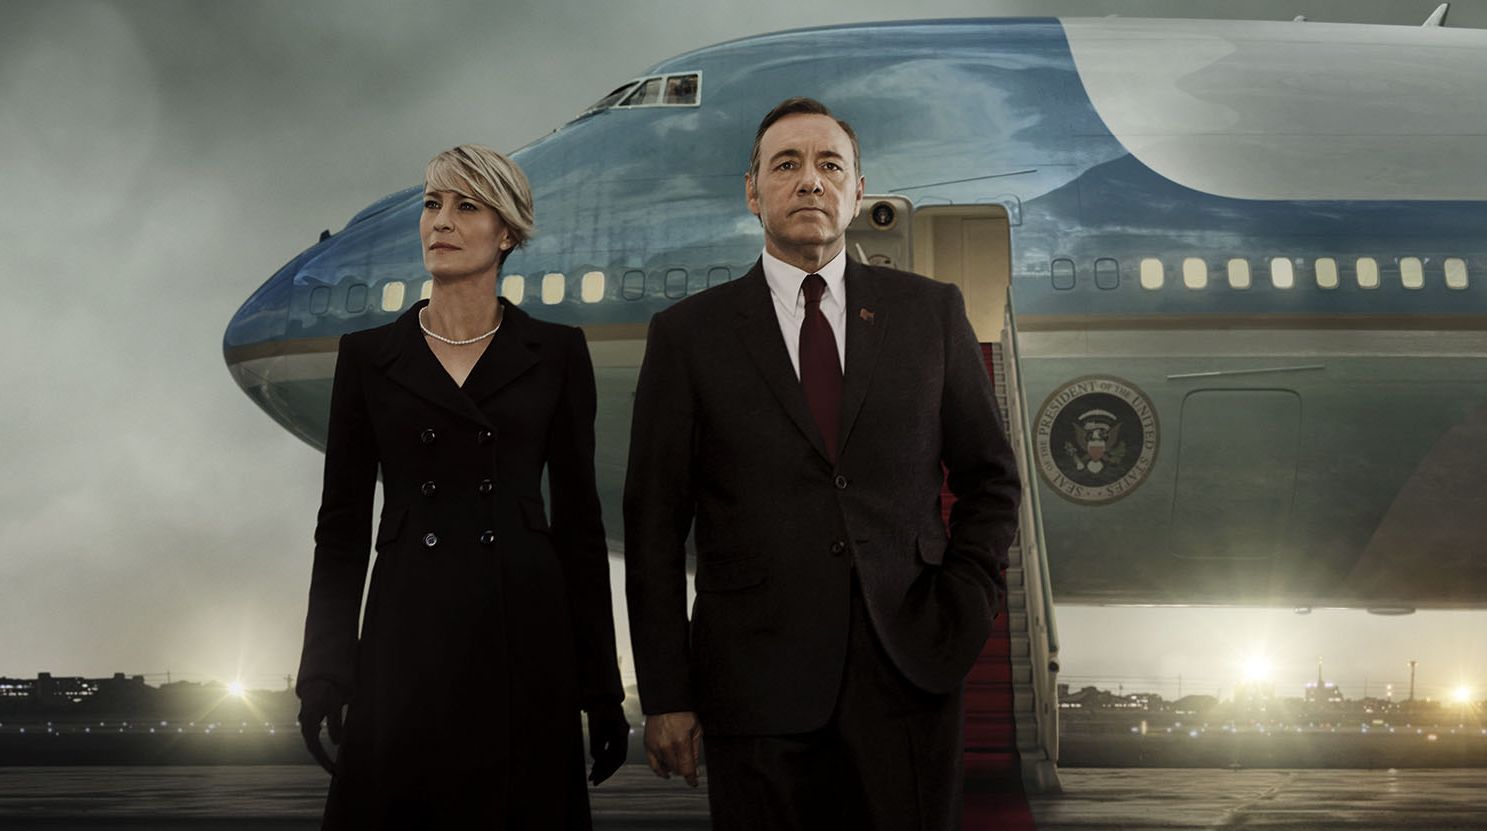 House of Cards renewed for fifth season